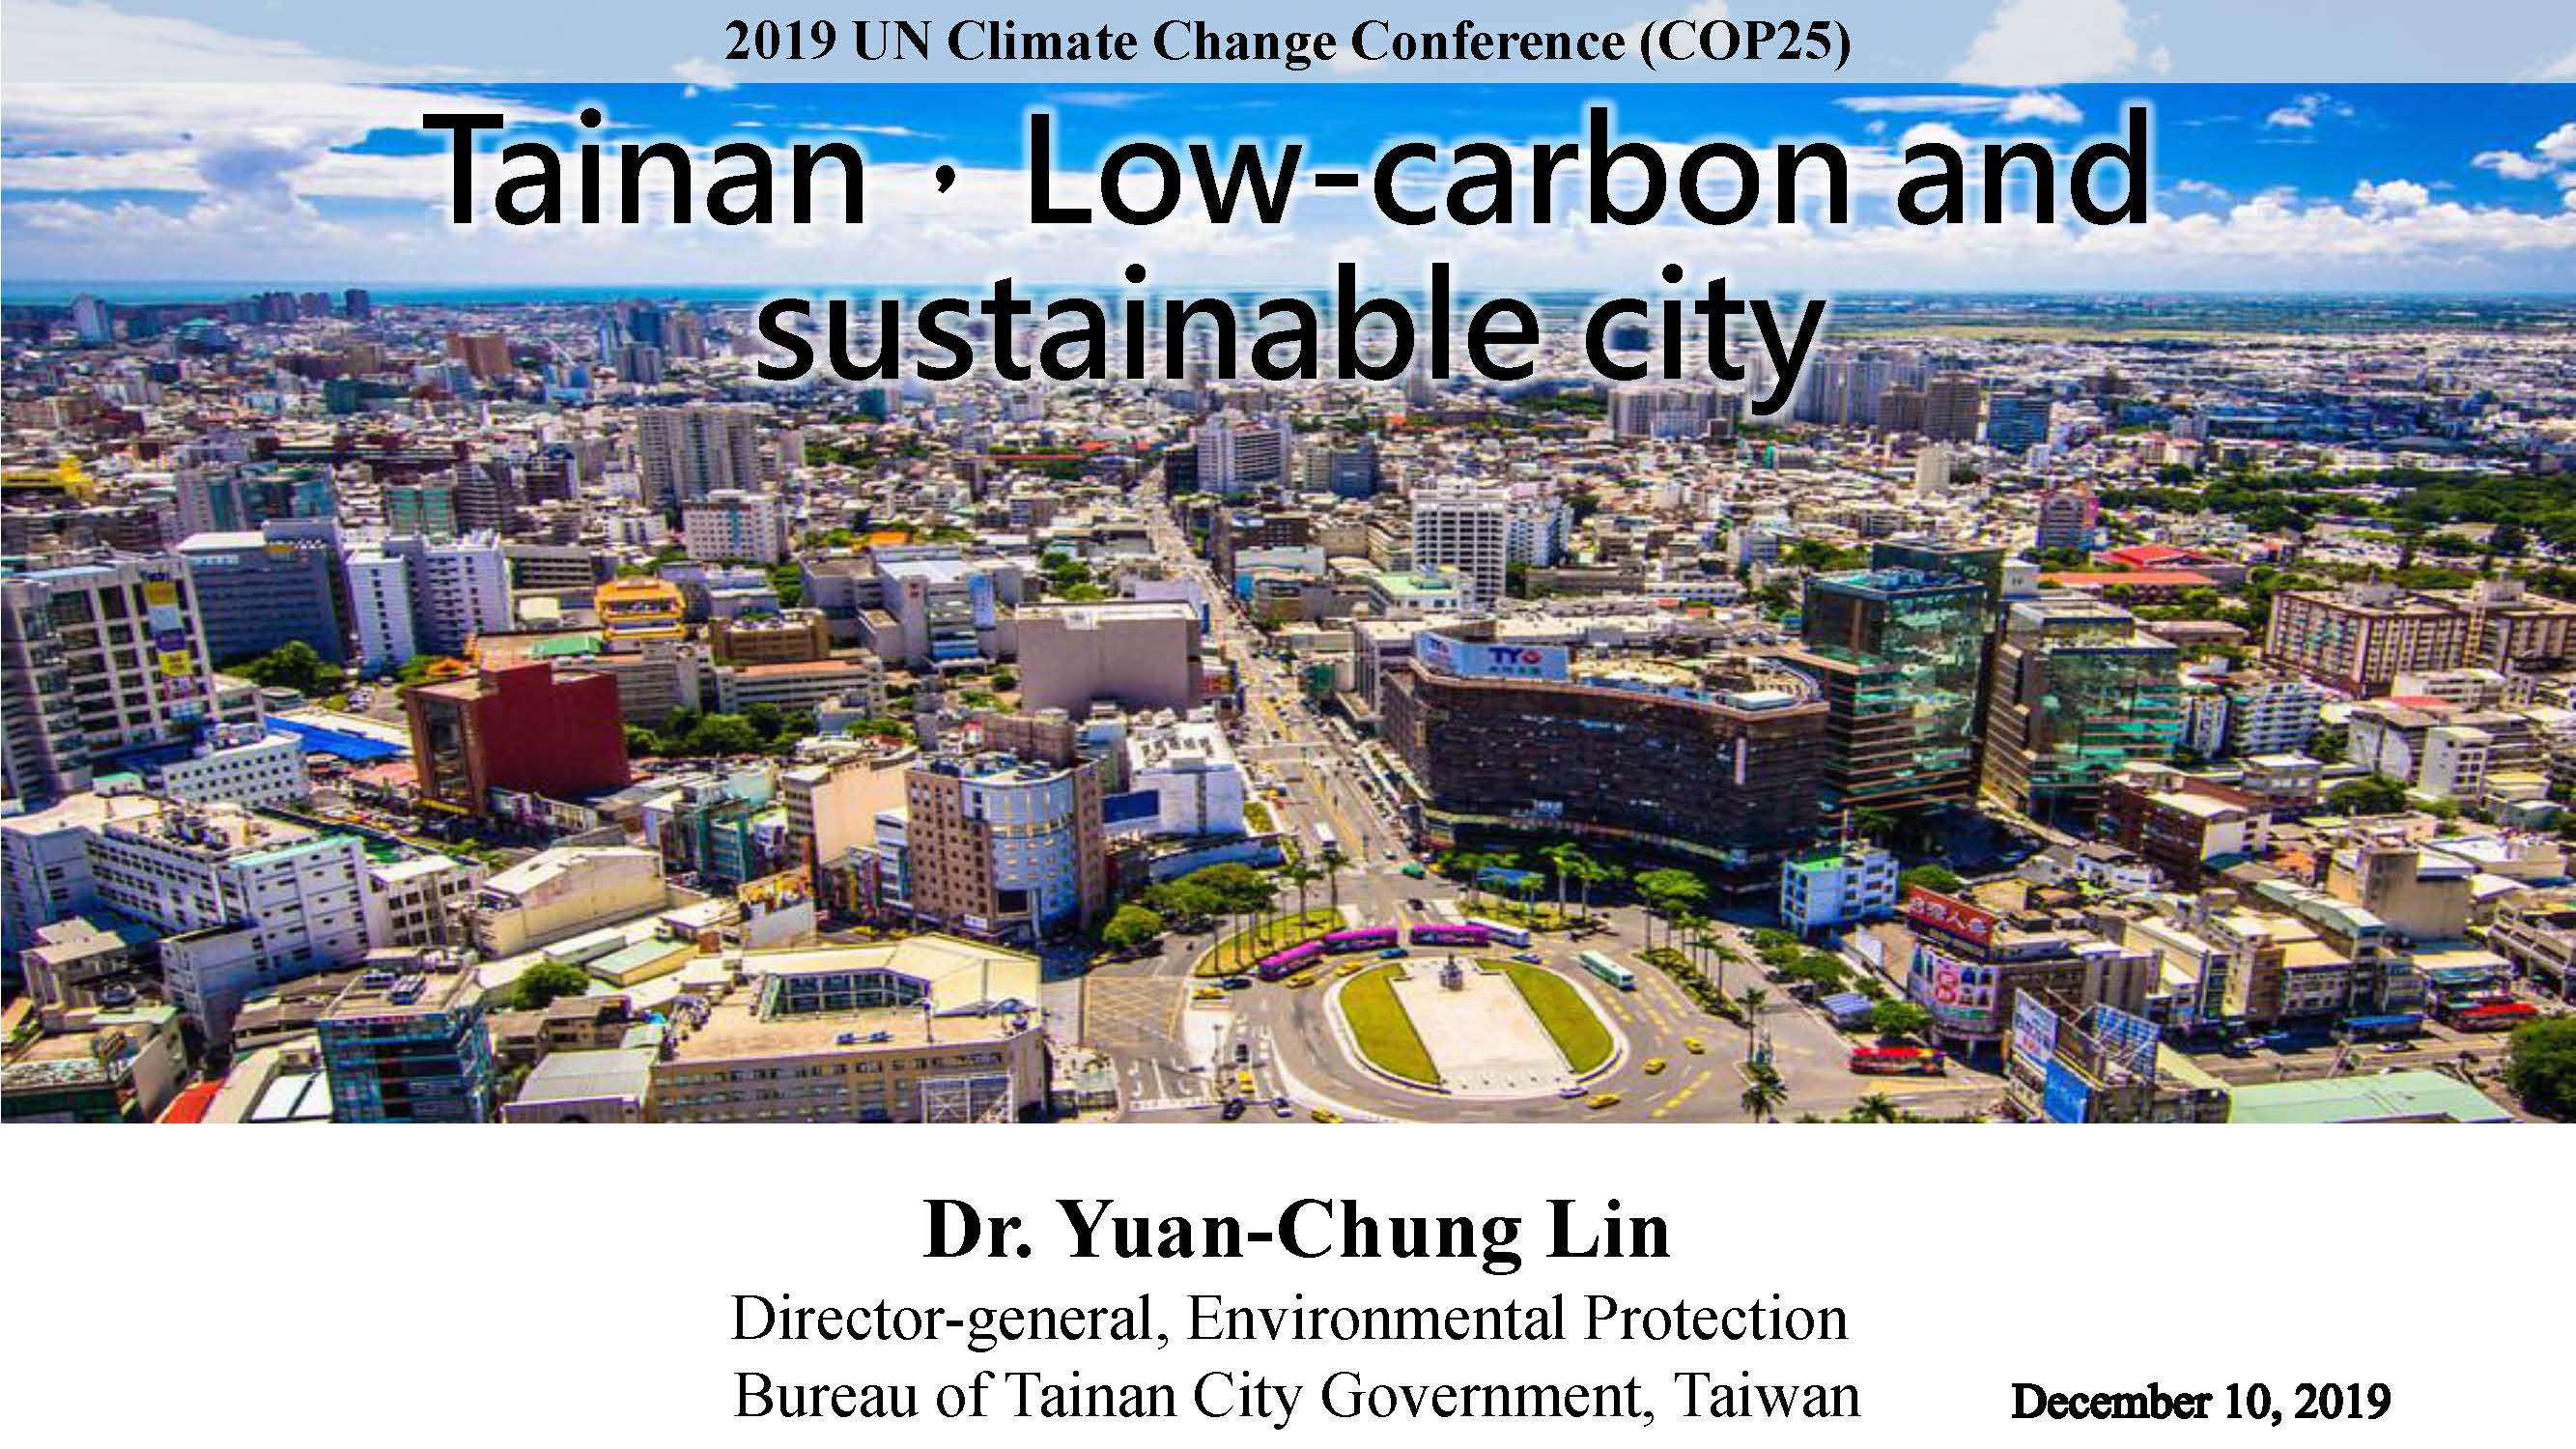 Tainan, Low-carbon and sustainable city (2019 UN Climate Change Conference)